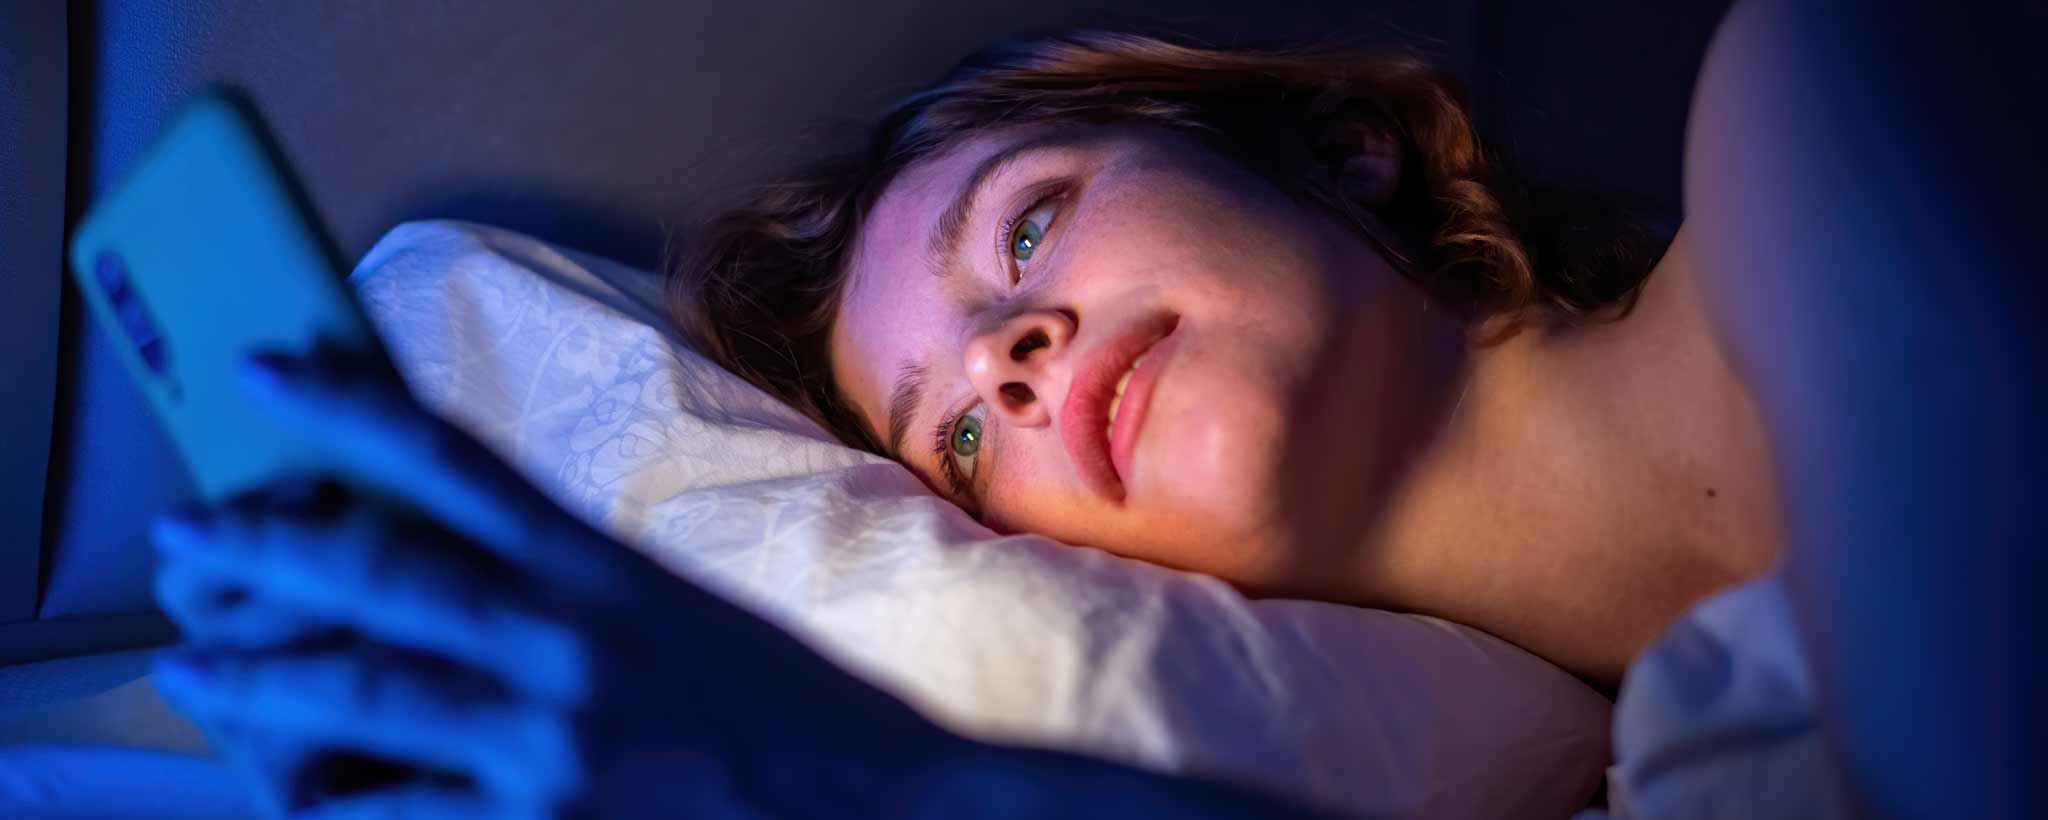 'Female lying in bed with smartphone'